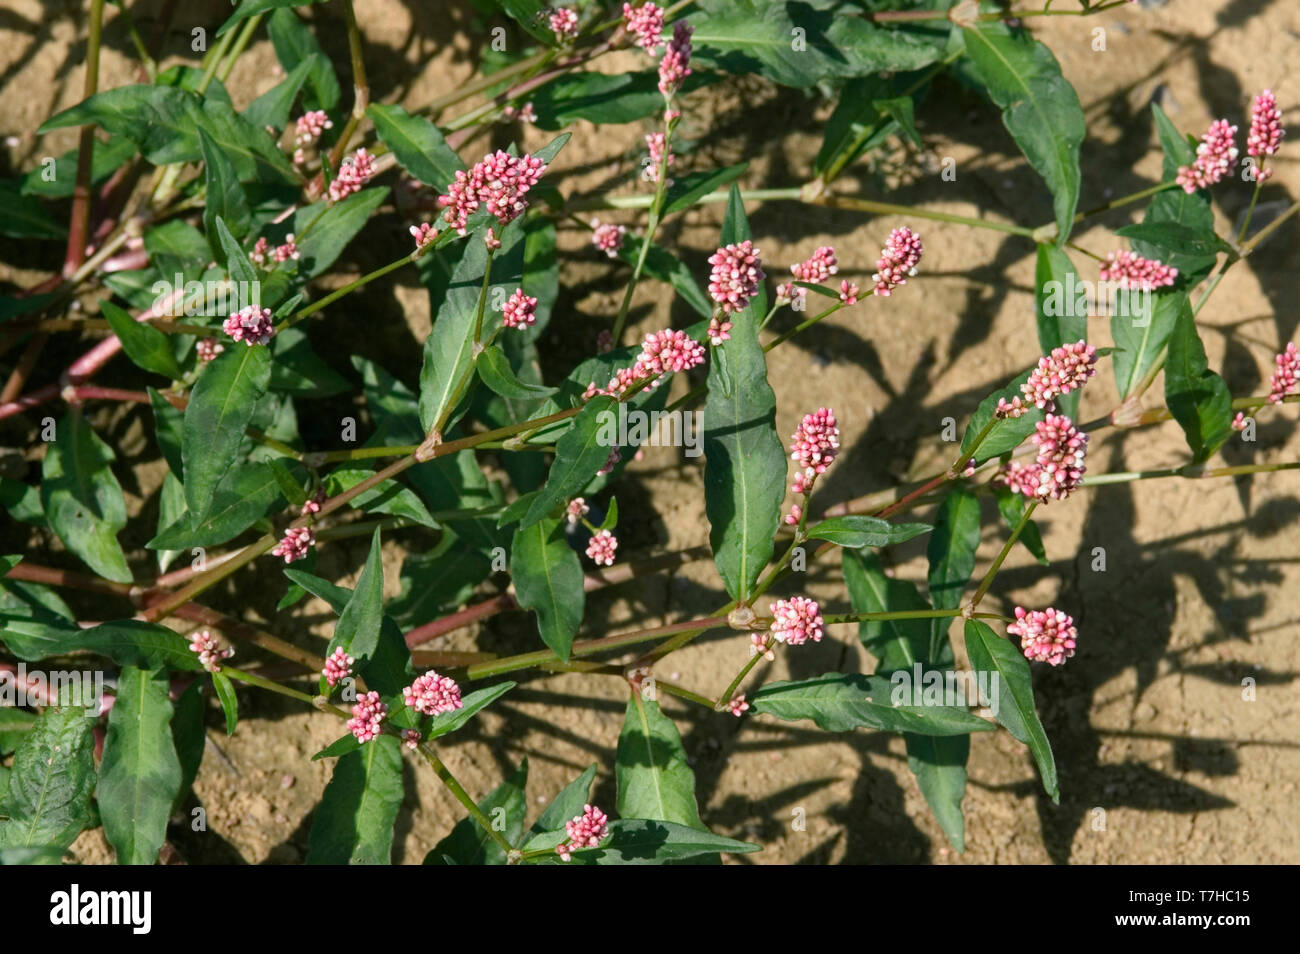 Redshank, Persicaria mnaculosa, flowering, a prostrate annual arable weed and invasive plant, September Stock Photo